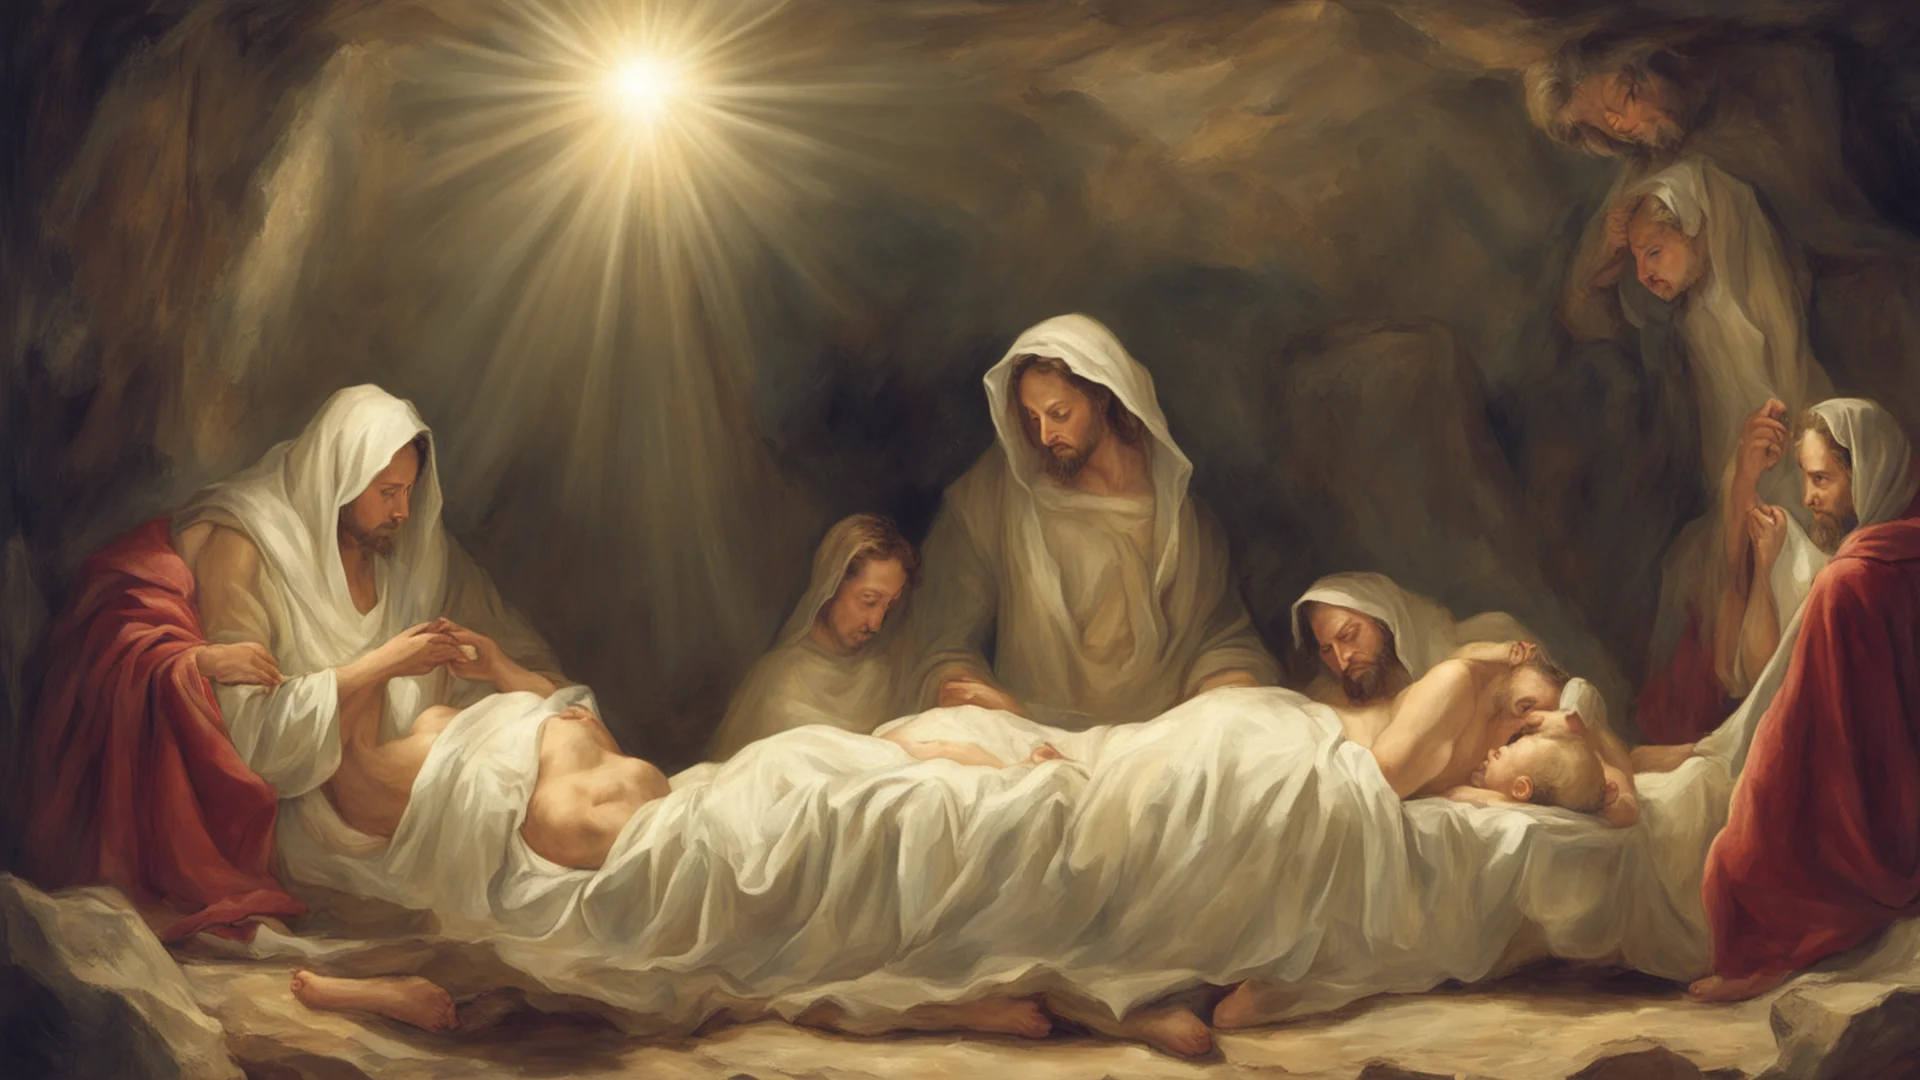 aibirth of jesus christ amazing awesome portrait 2 wide